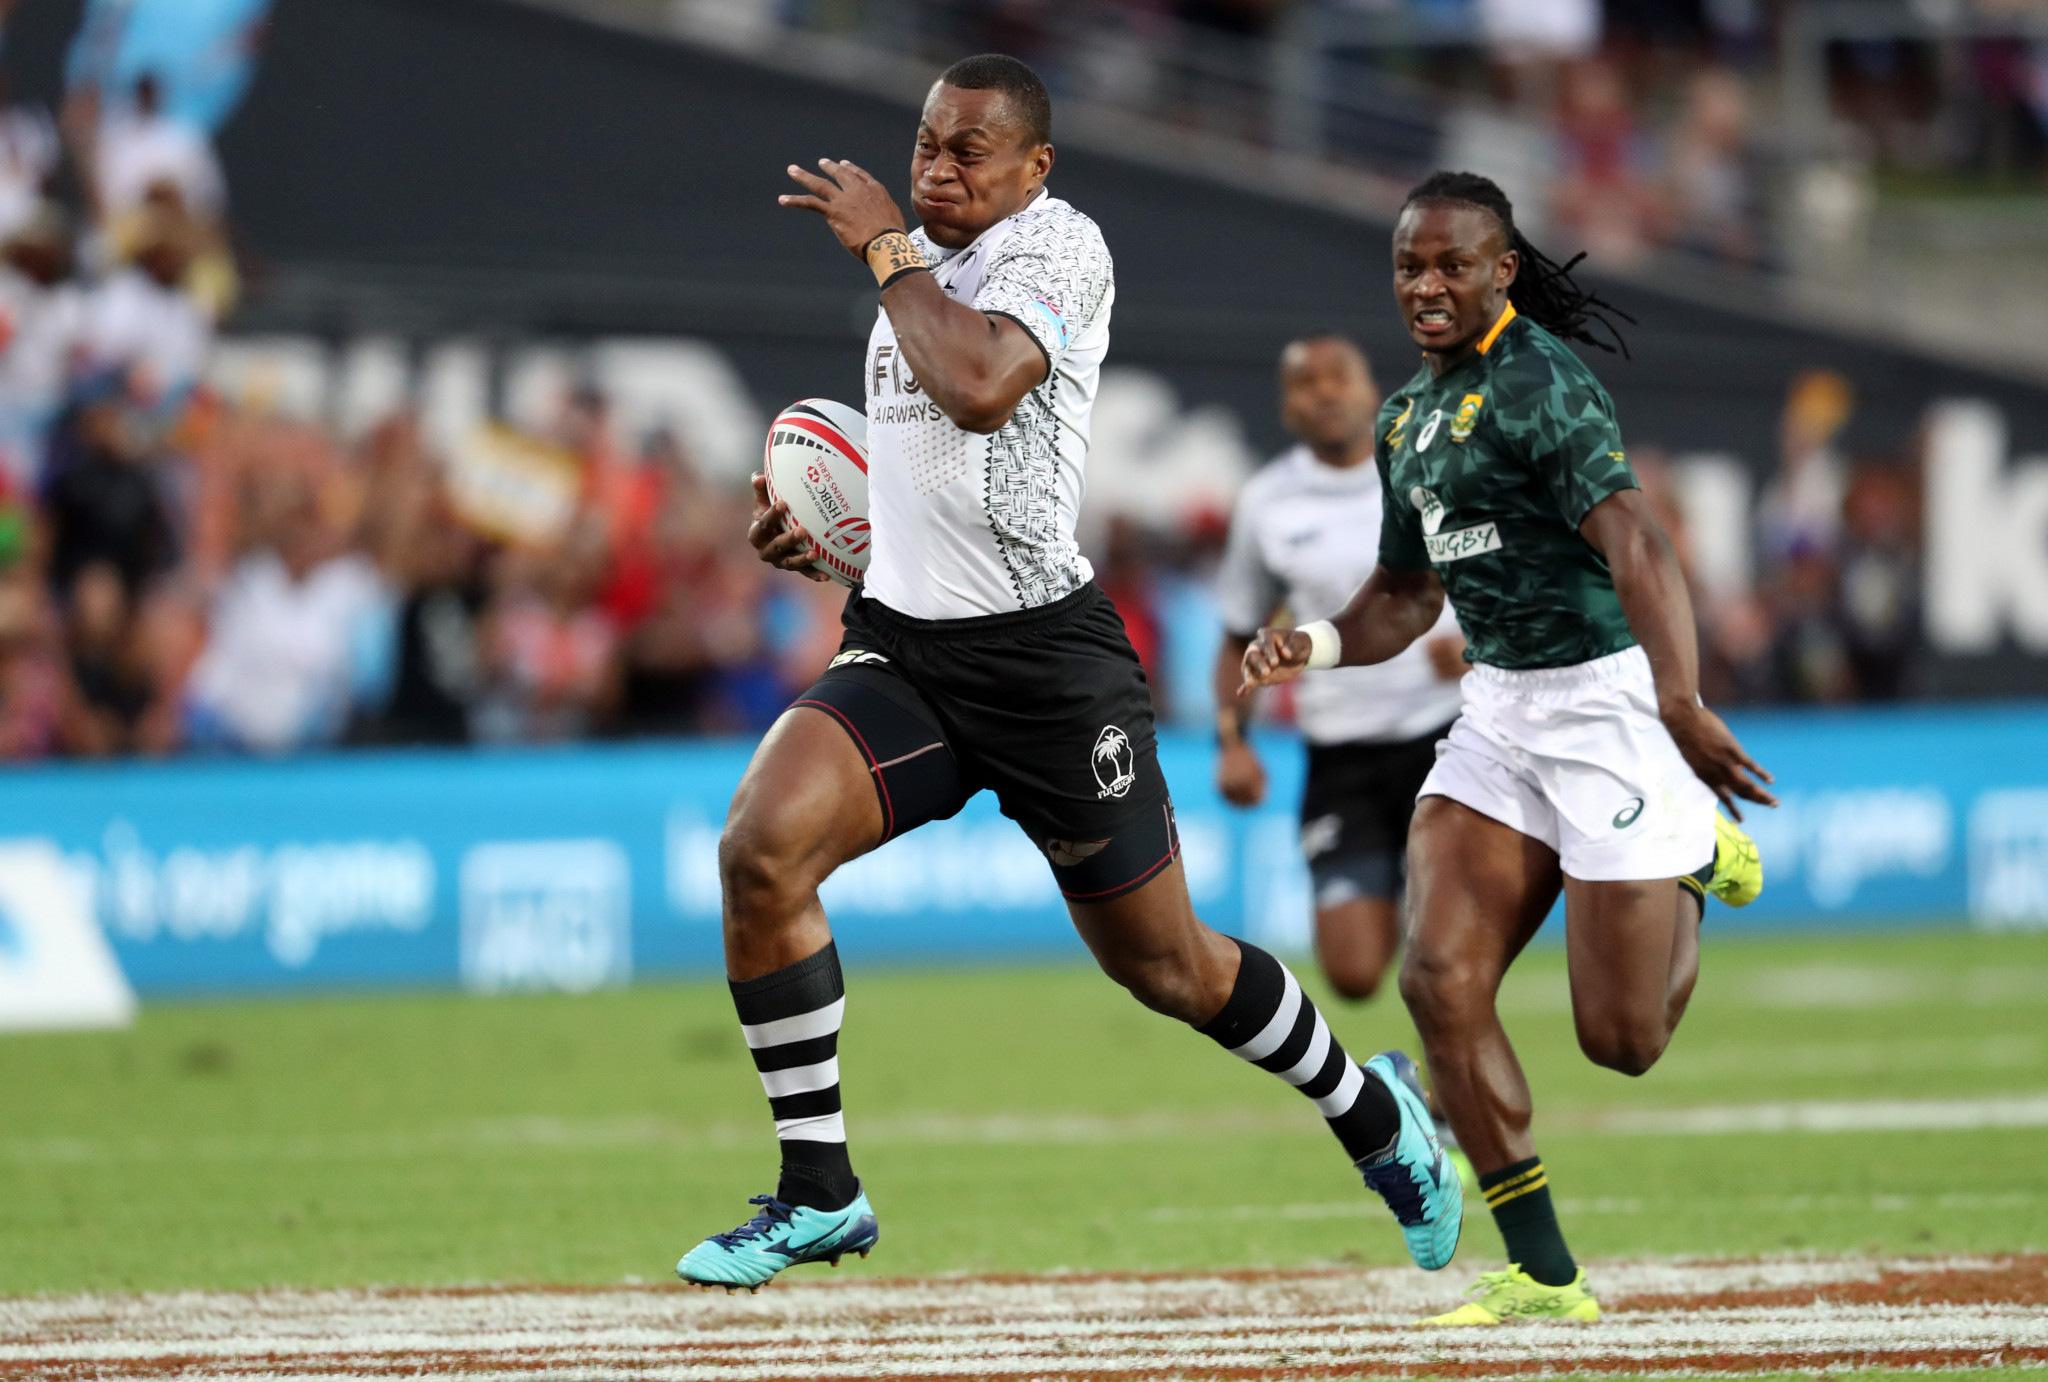 Fiji fightback to stun South Africa in final of World Rugby Sevens